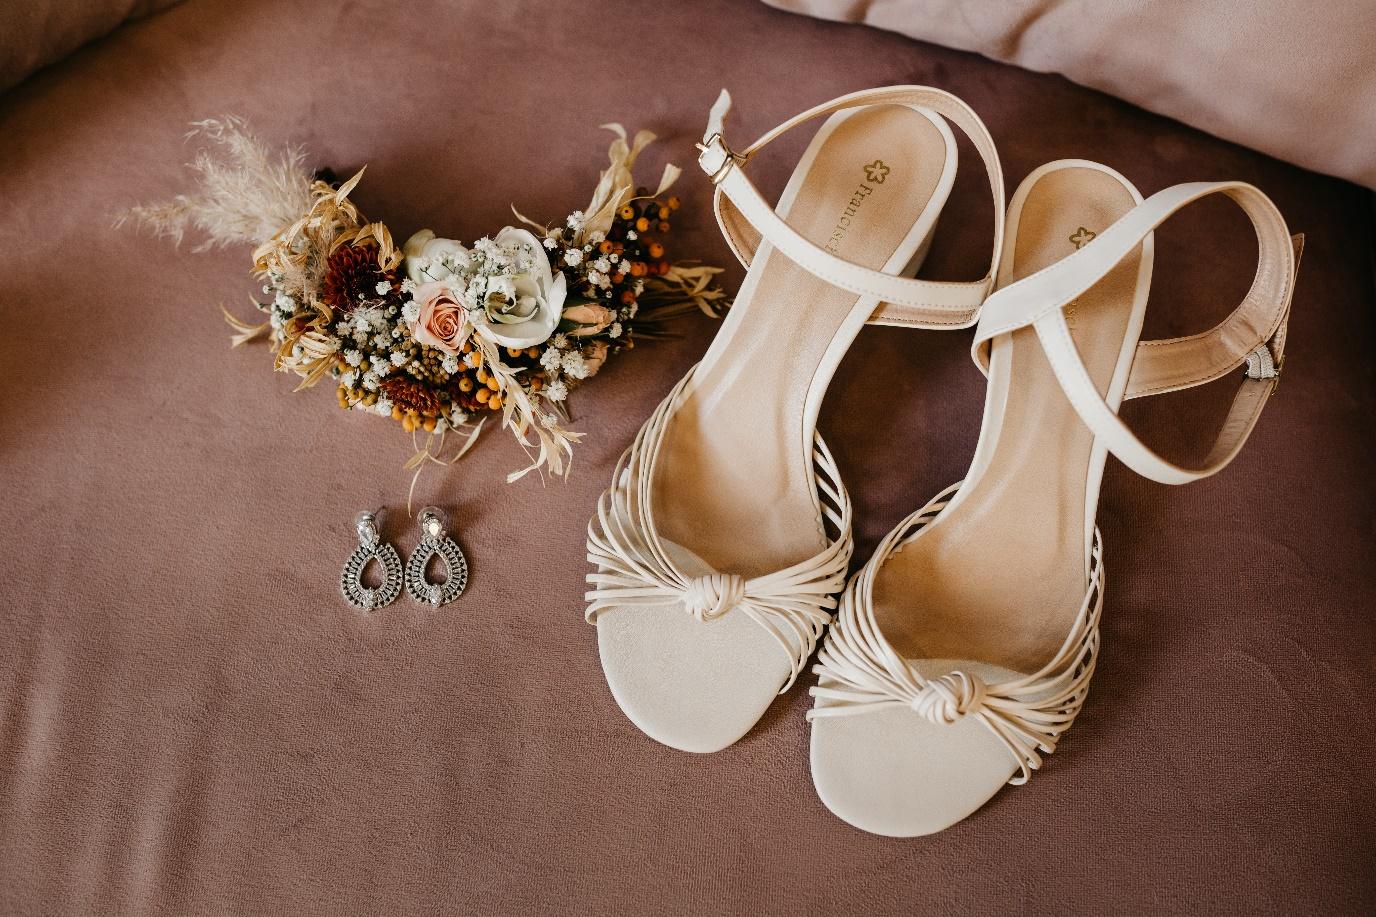 Accessorising Perfection: How to Choose the Right Bridal Accessories for Your Big Day